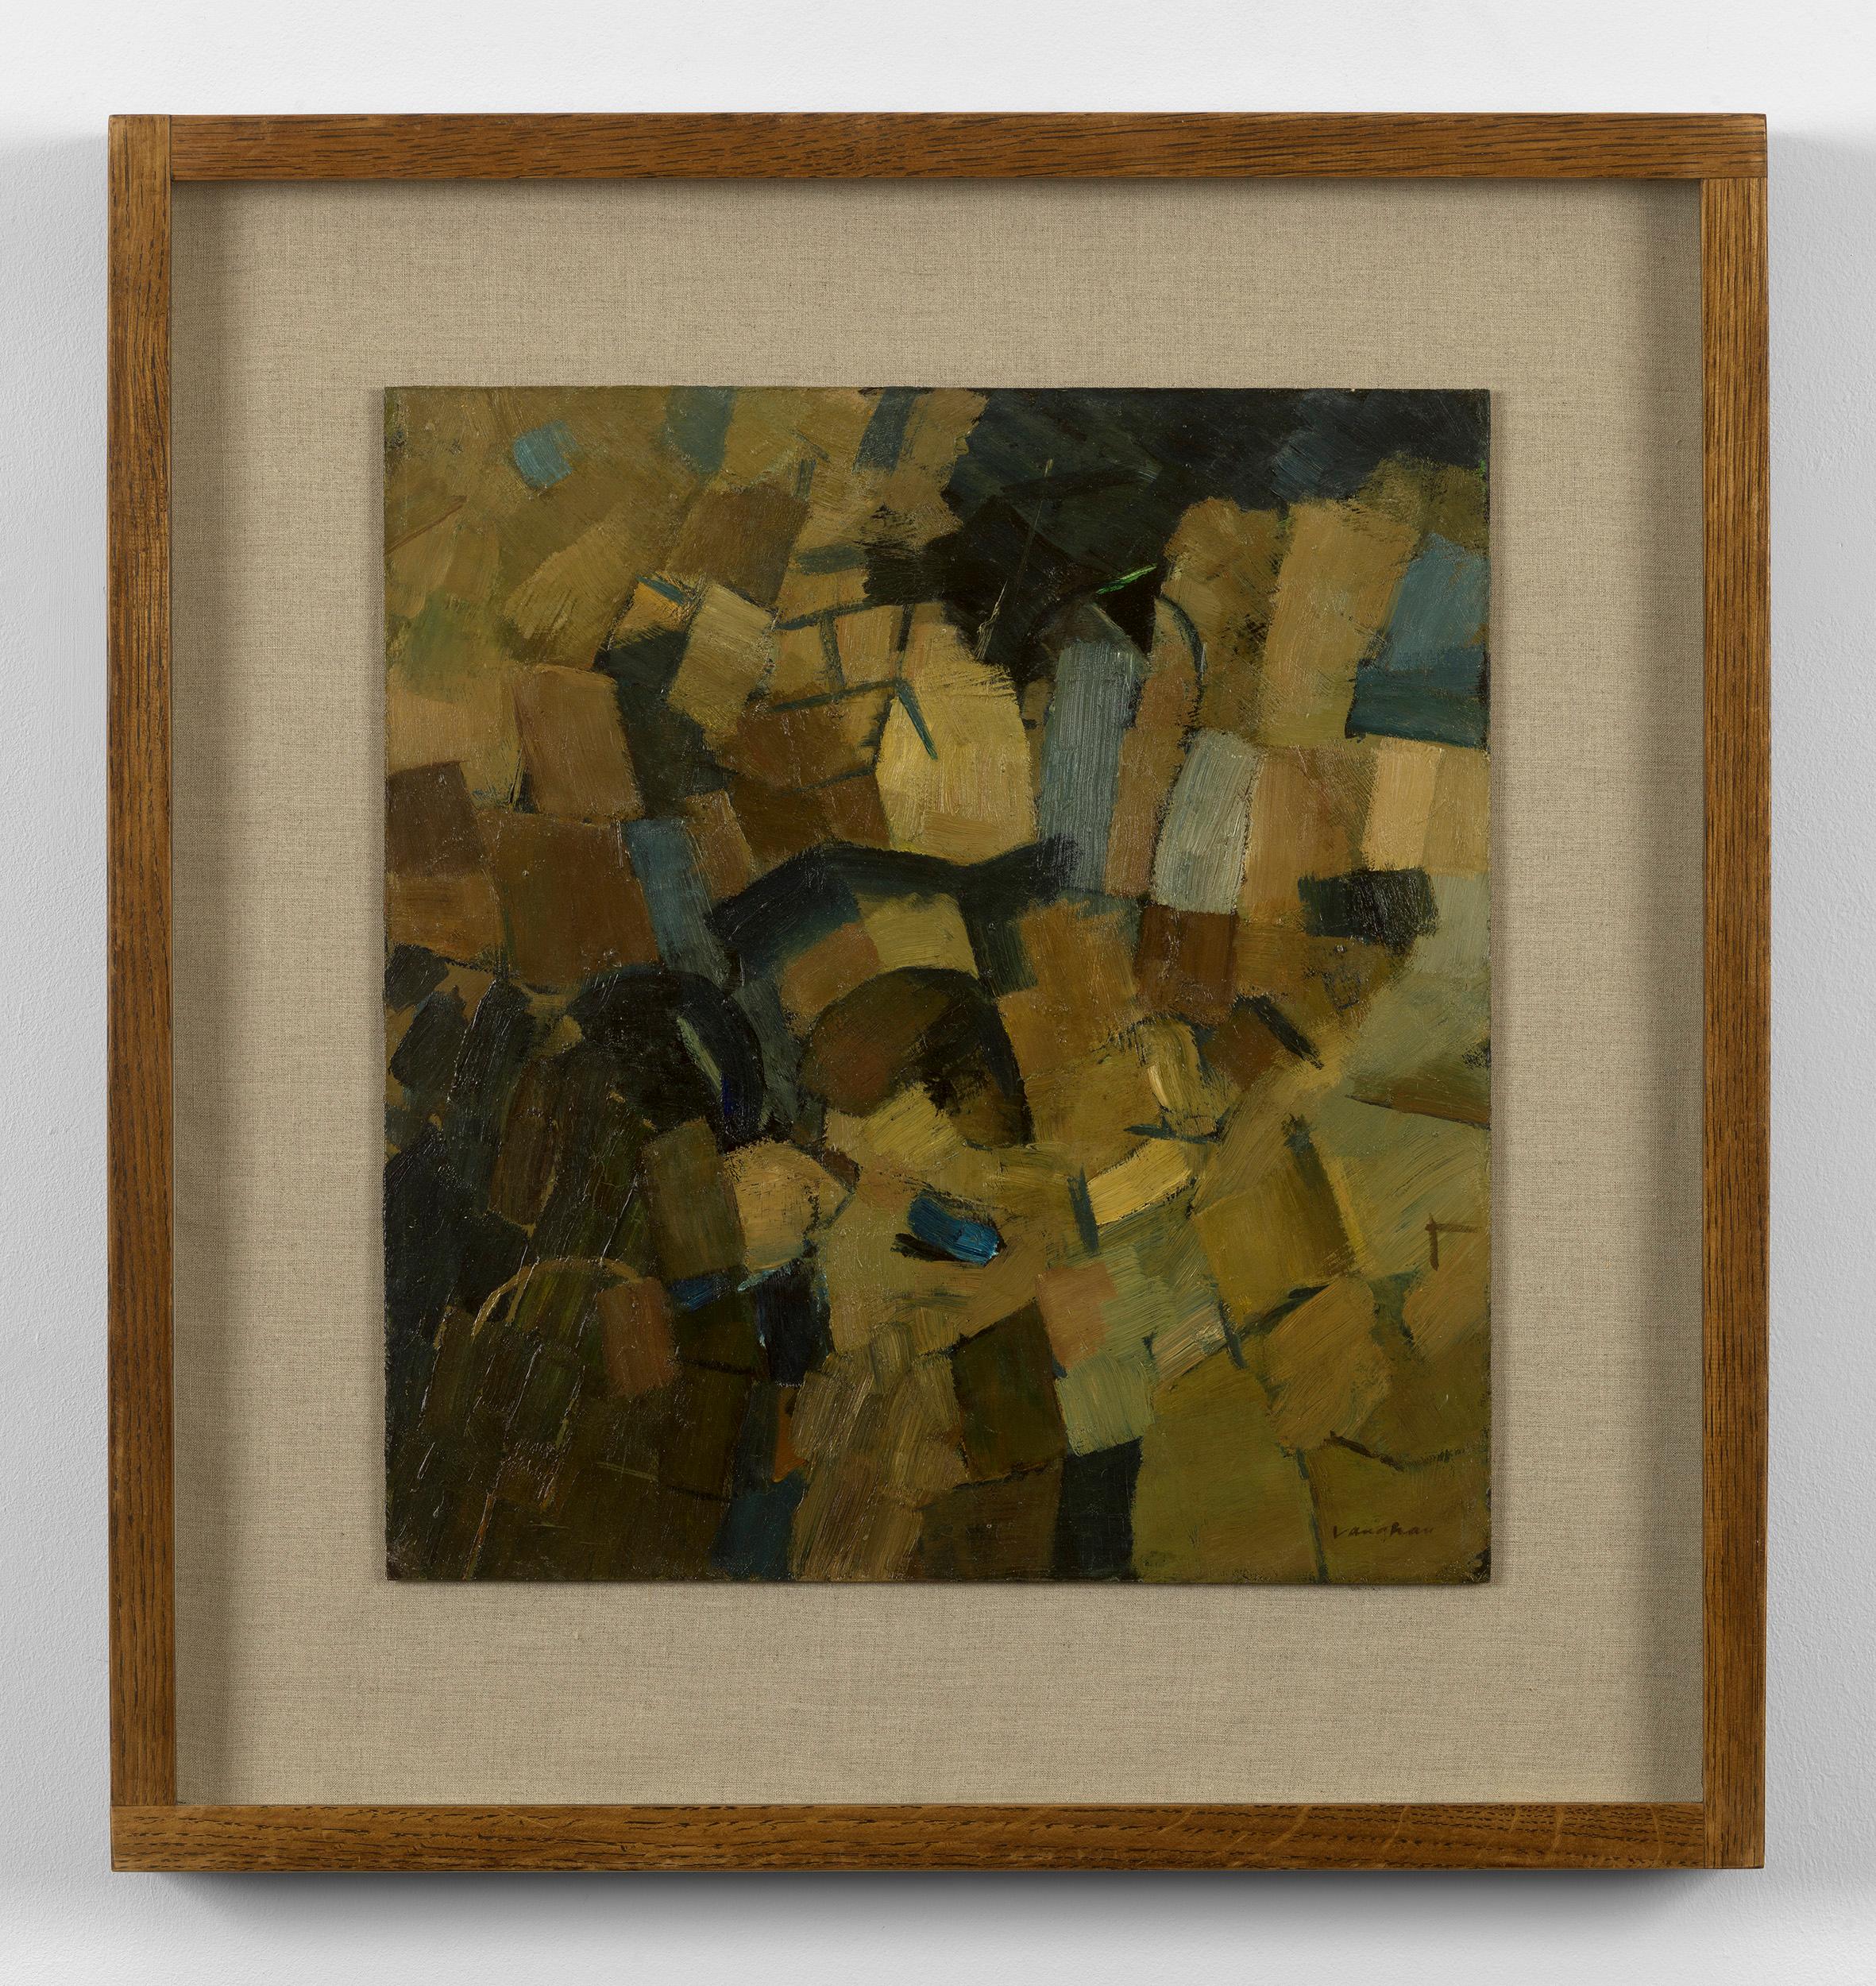 Signed lower right.
From the later 1950s, Vaughan painted landscapes without figures that verged towards complete abstraction: works in which colour is tessellated into compositions structured by more or less geometrical units. The impetus was light